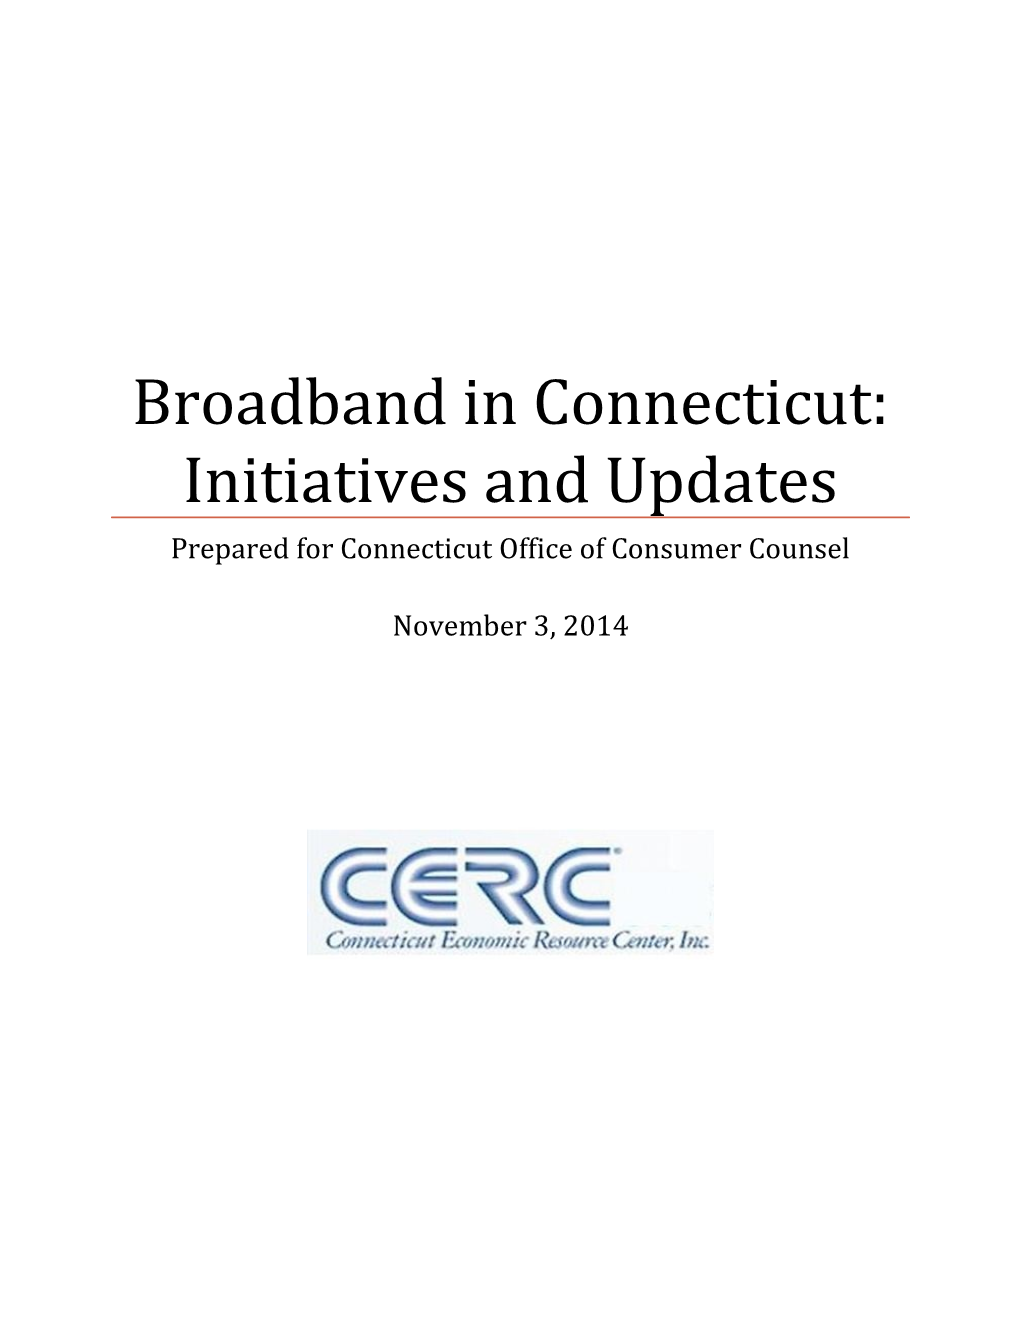 Broadband in Connecticut: Initiatives and Updates